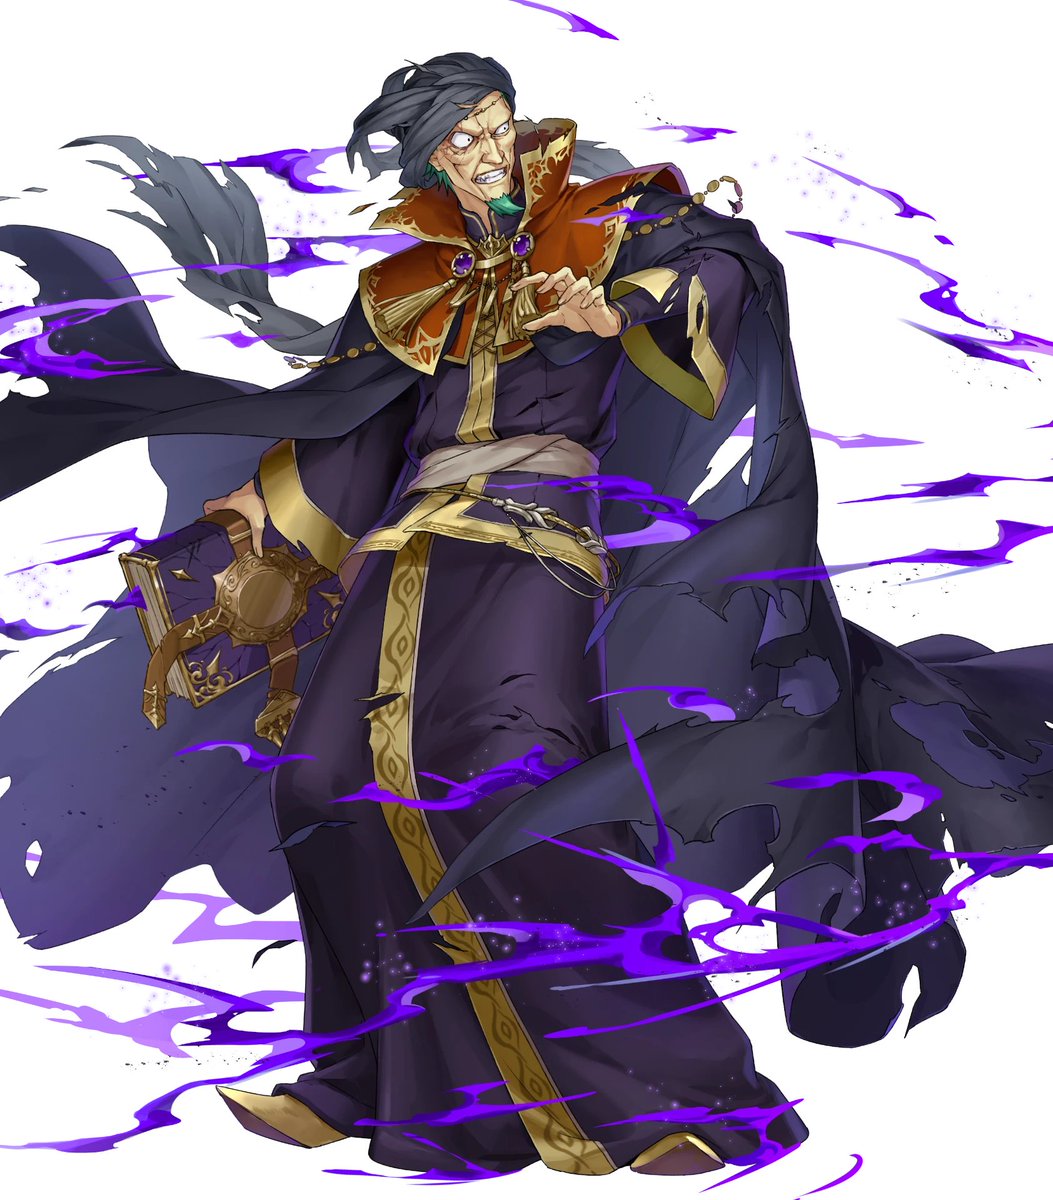 Full Artwork of Fallen Nergal!
The Artist is Shibayama wankuro.

Nergal can steal up the bonus status effects and heal with his [Essence Drain] status!